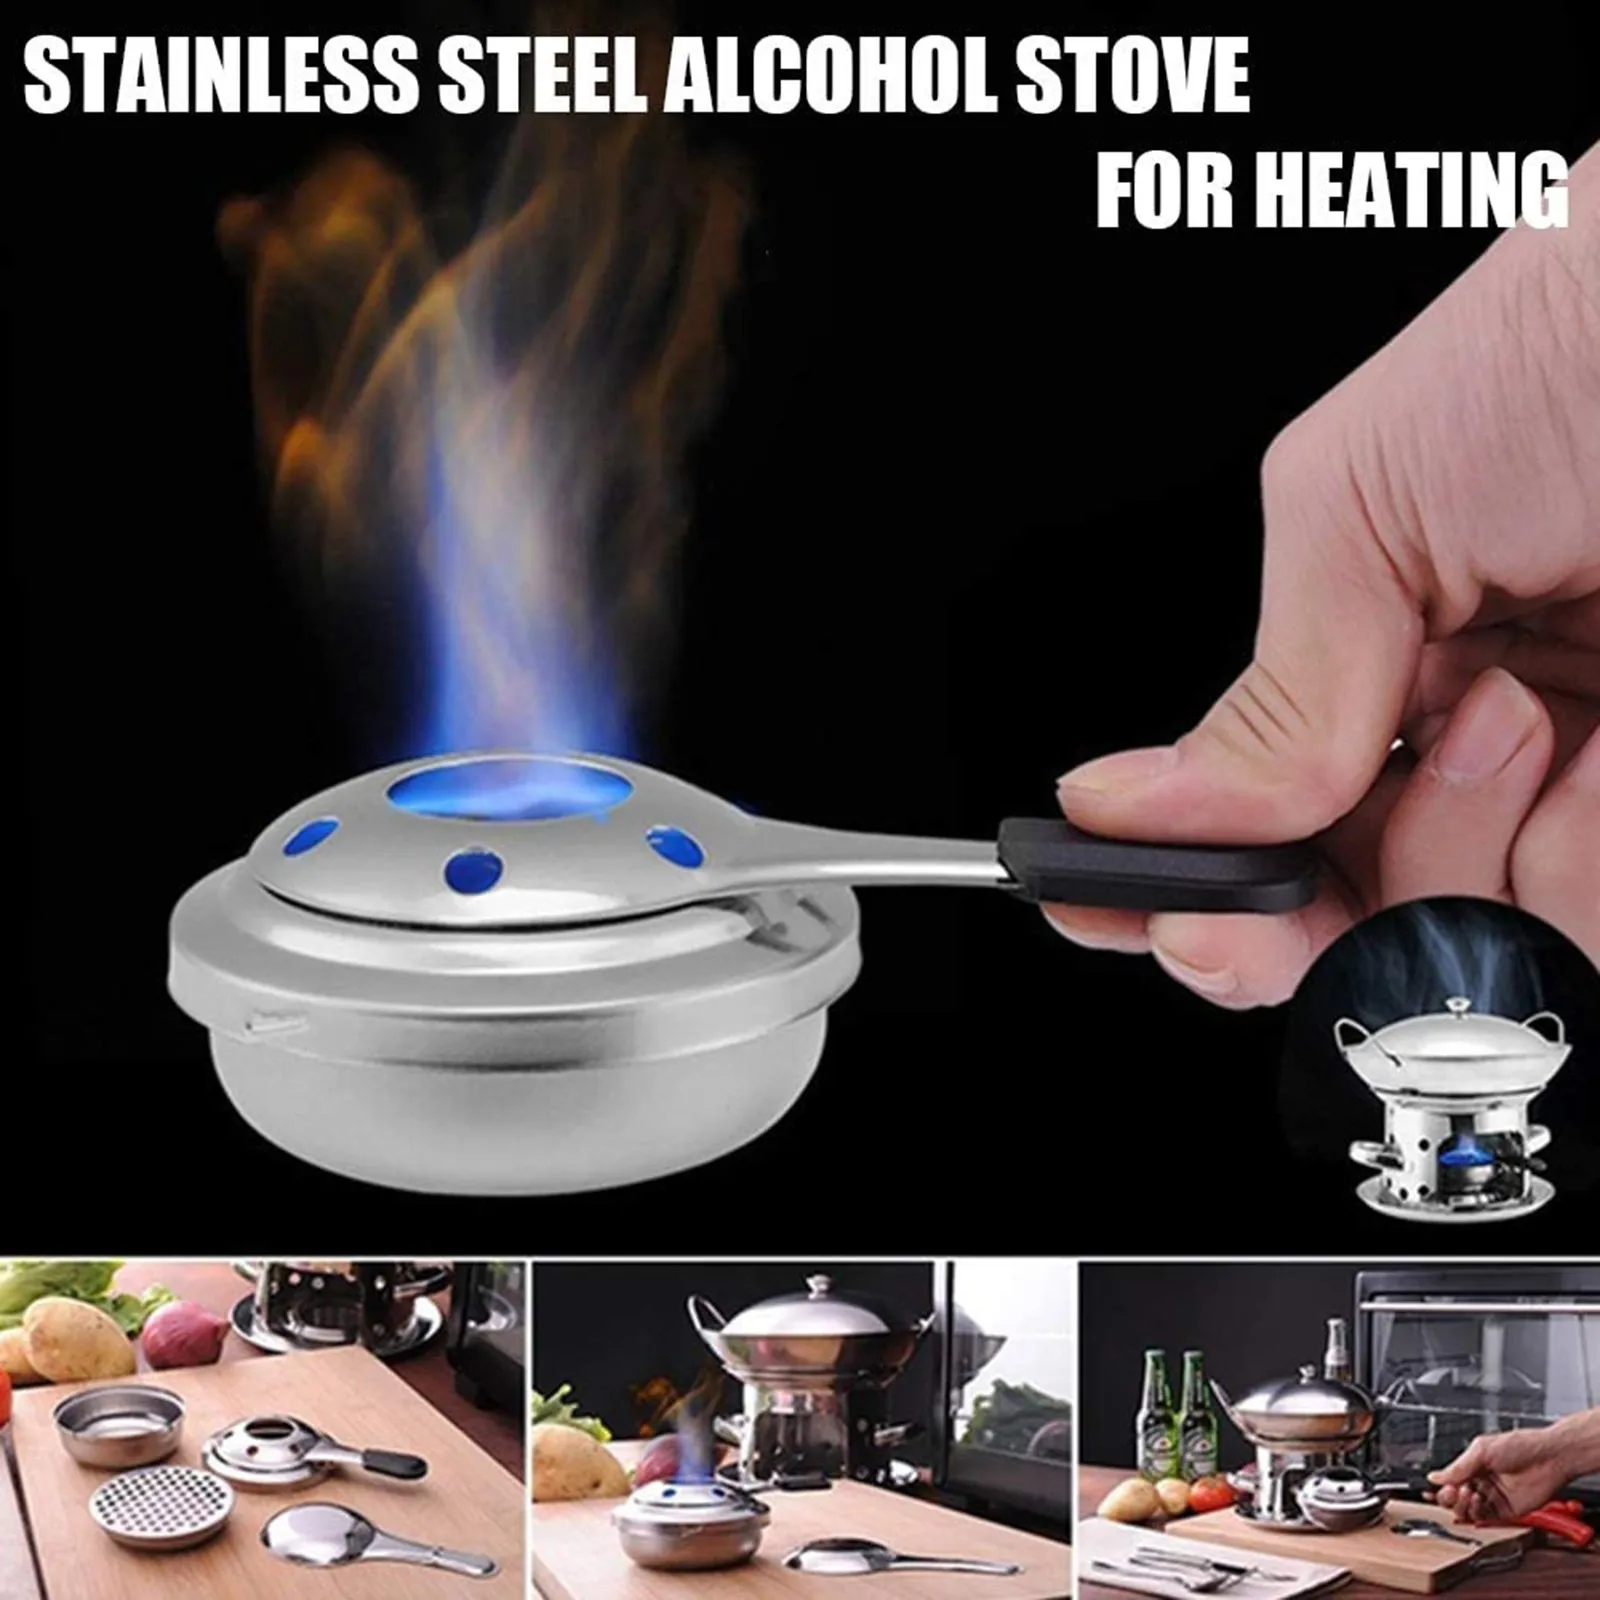 Portable Mini Fondue Pot Burner,Suitable for Party and Picnic Outdoor Camping Picnic Cooking Pot Safe Fondue Fuel Portable Stainless Steel Alcohol Stove Burner Stainless Steel Fondue Burner 